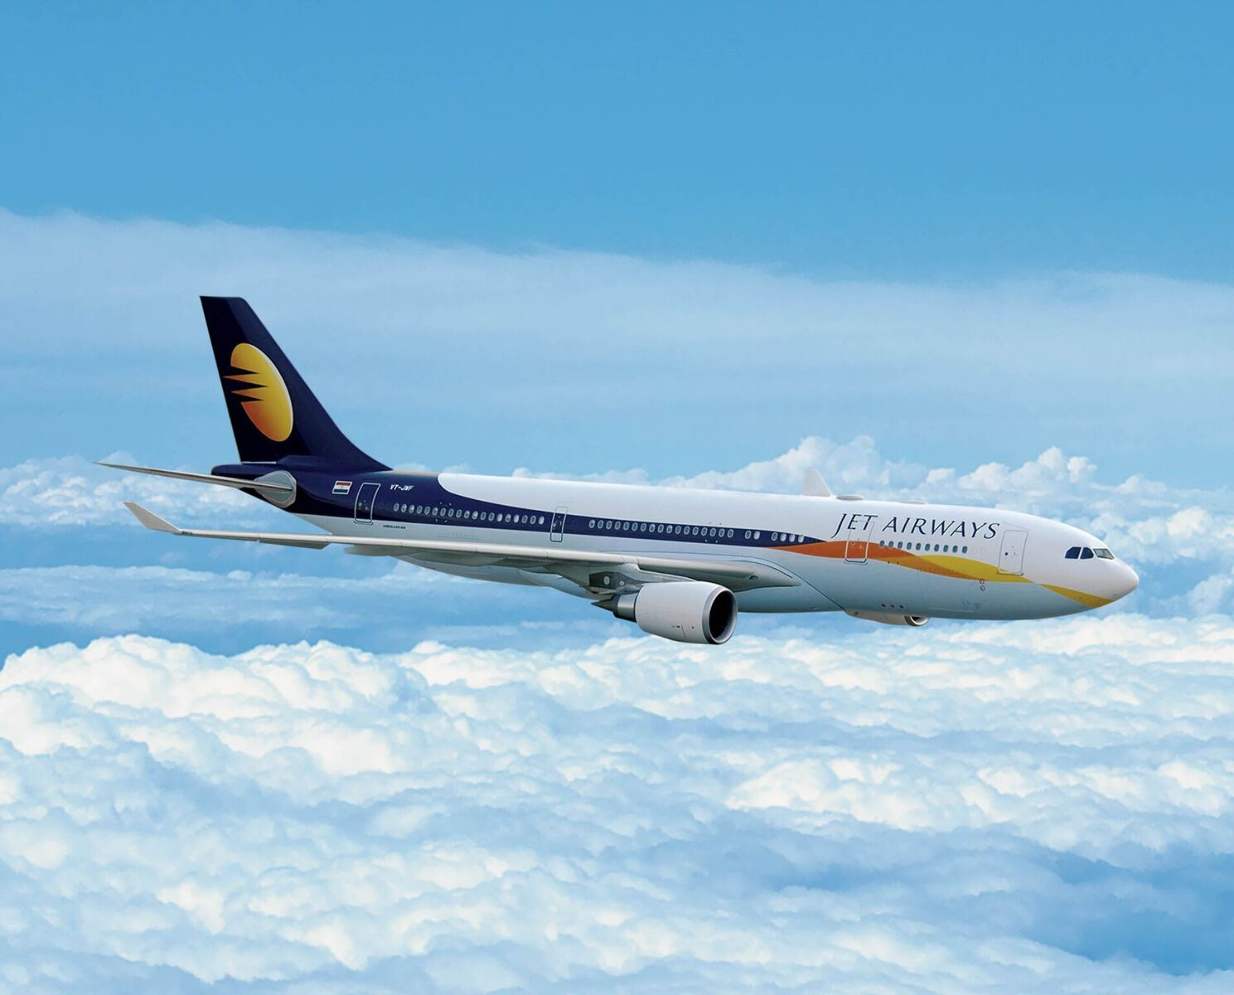 Jet Airways expands services to Europe, Middle East